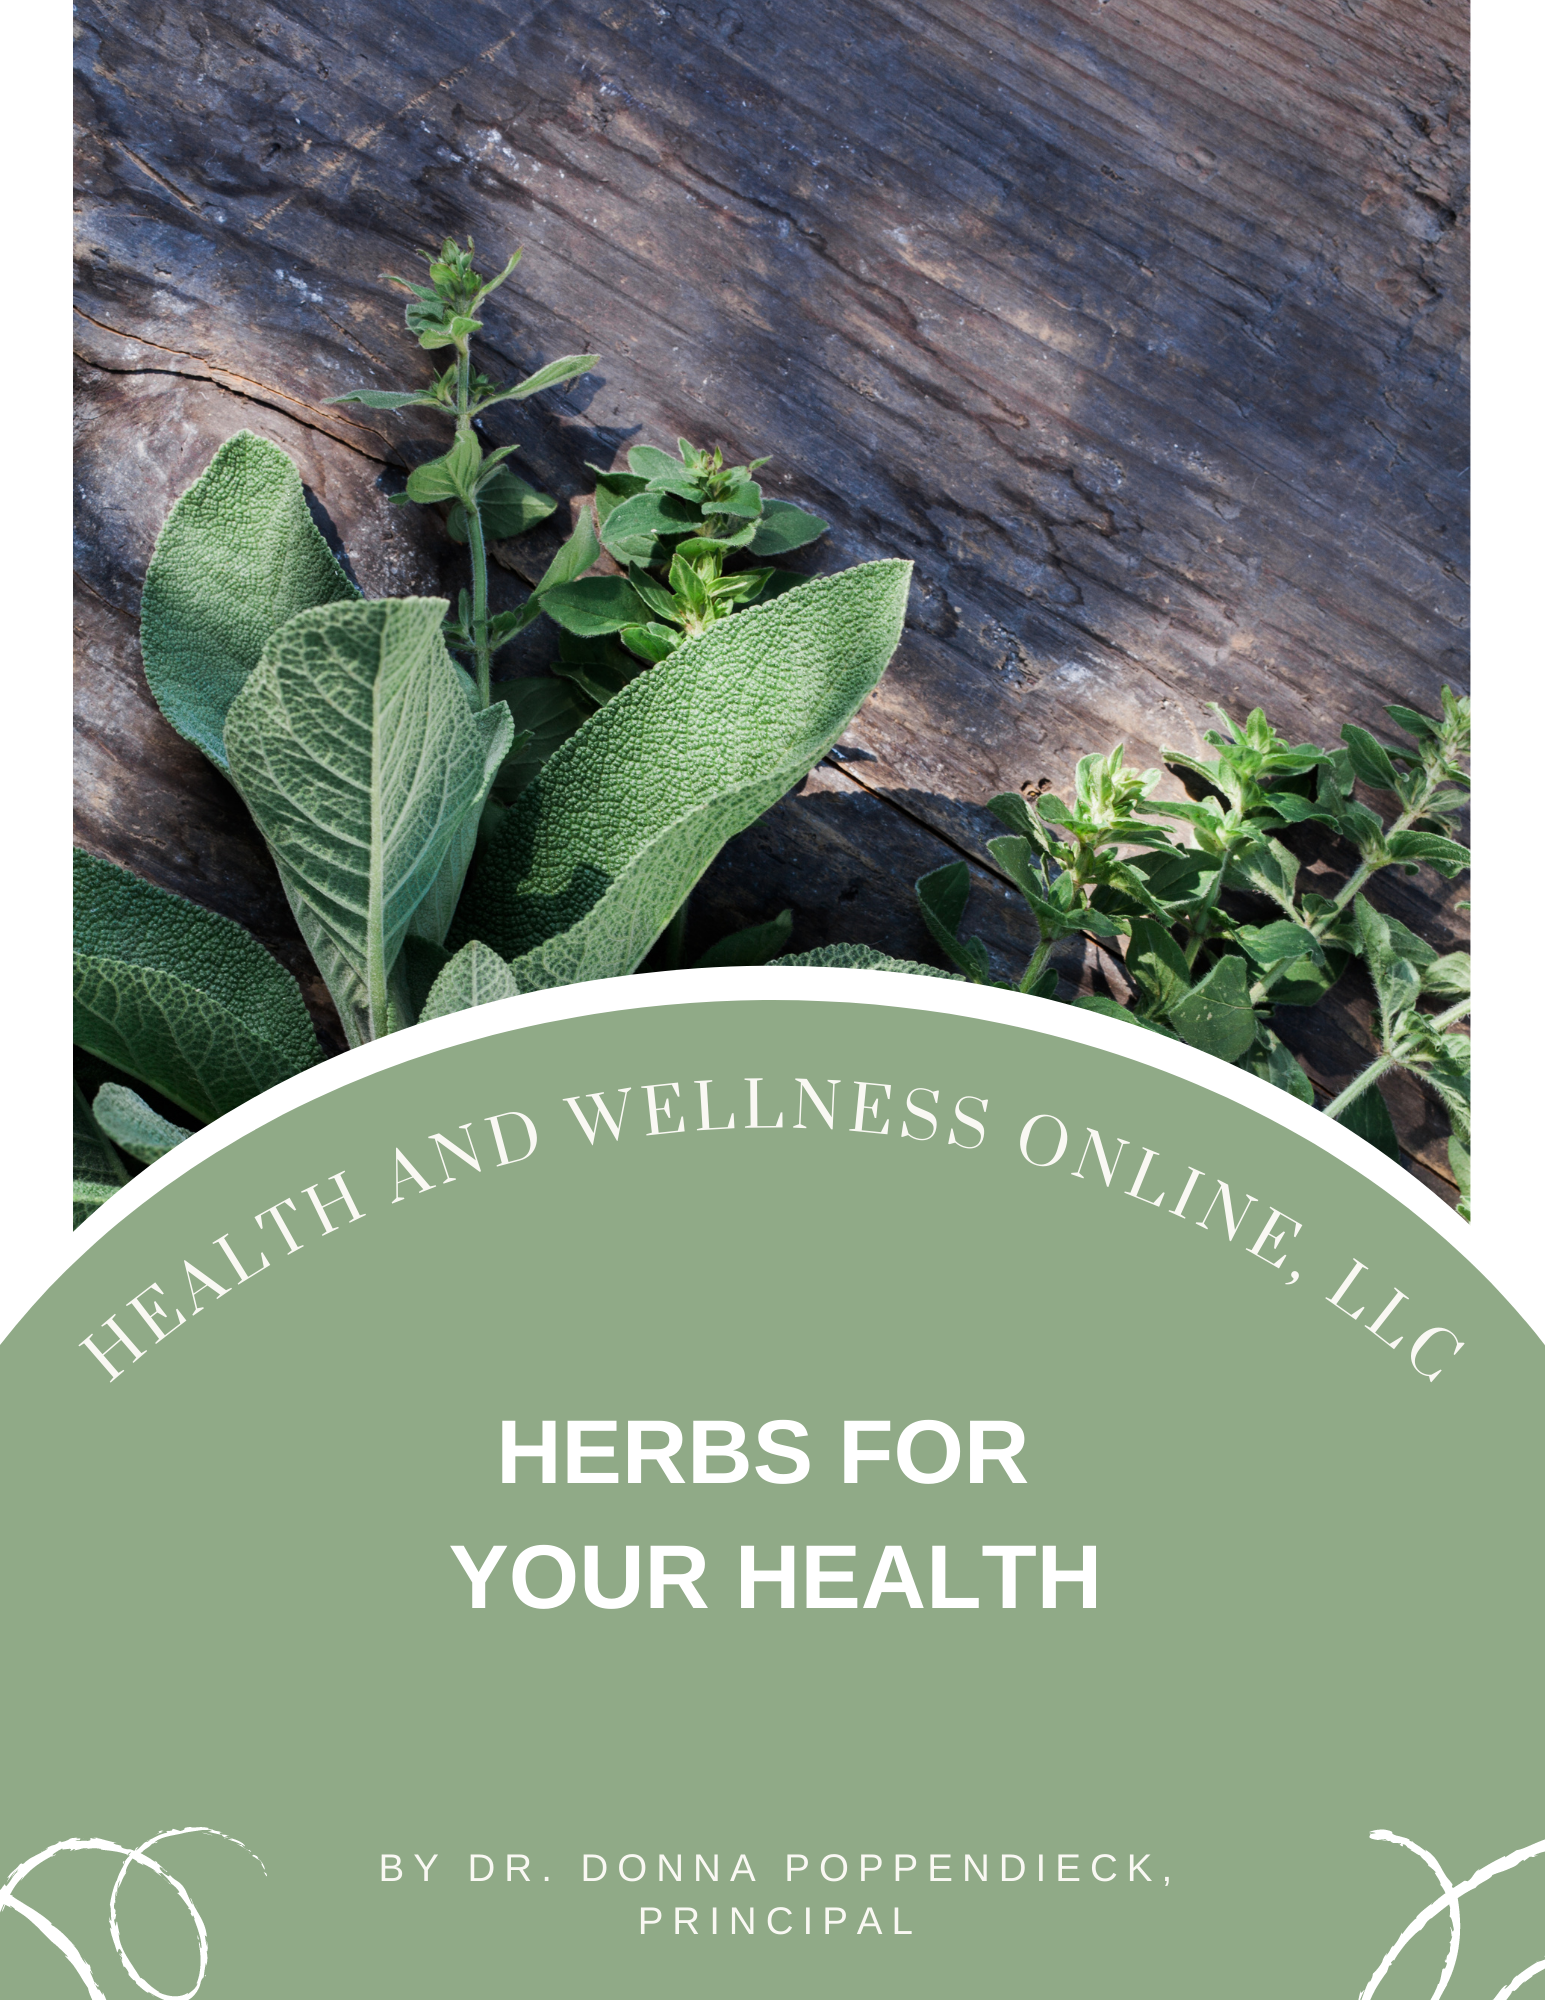 Herbs for Your Health is a Course by Dr. Donna Poppendieck from Health and Wellness Online.